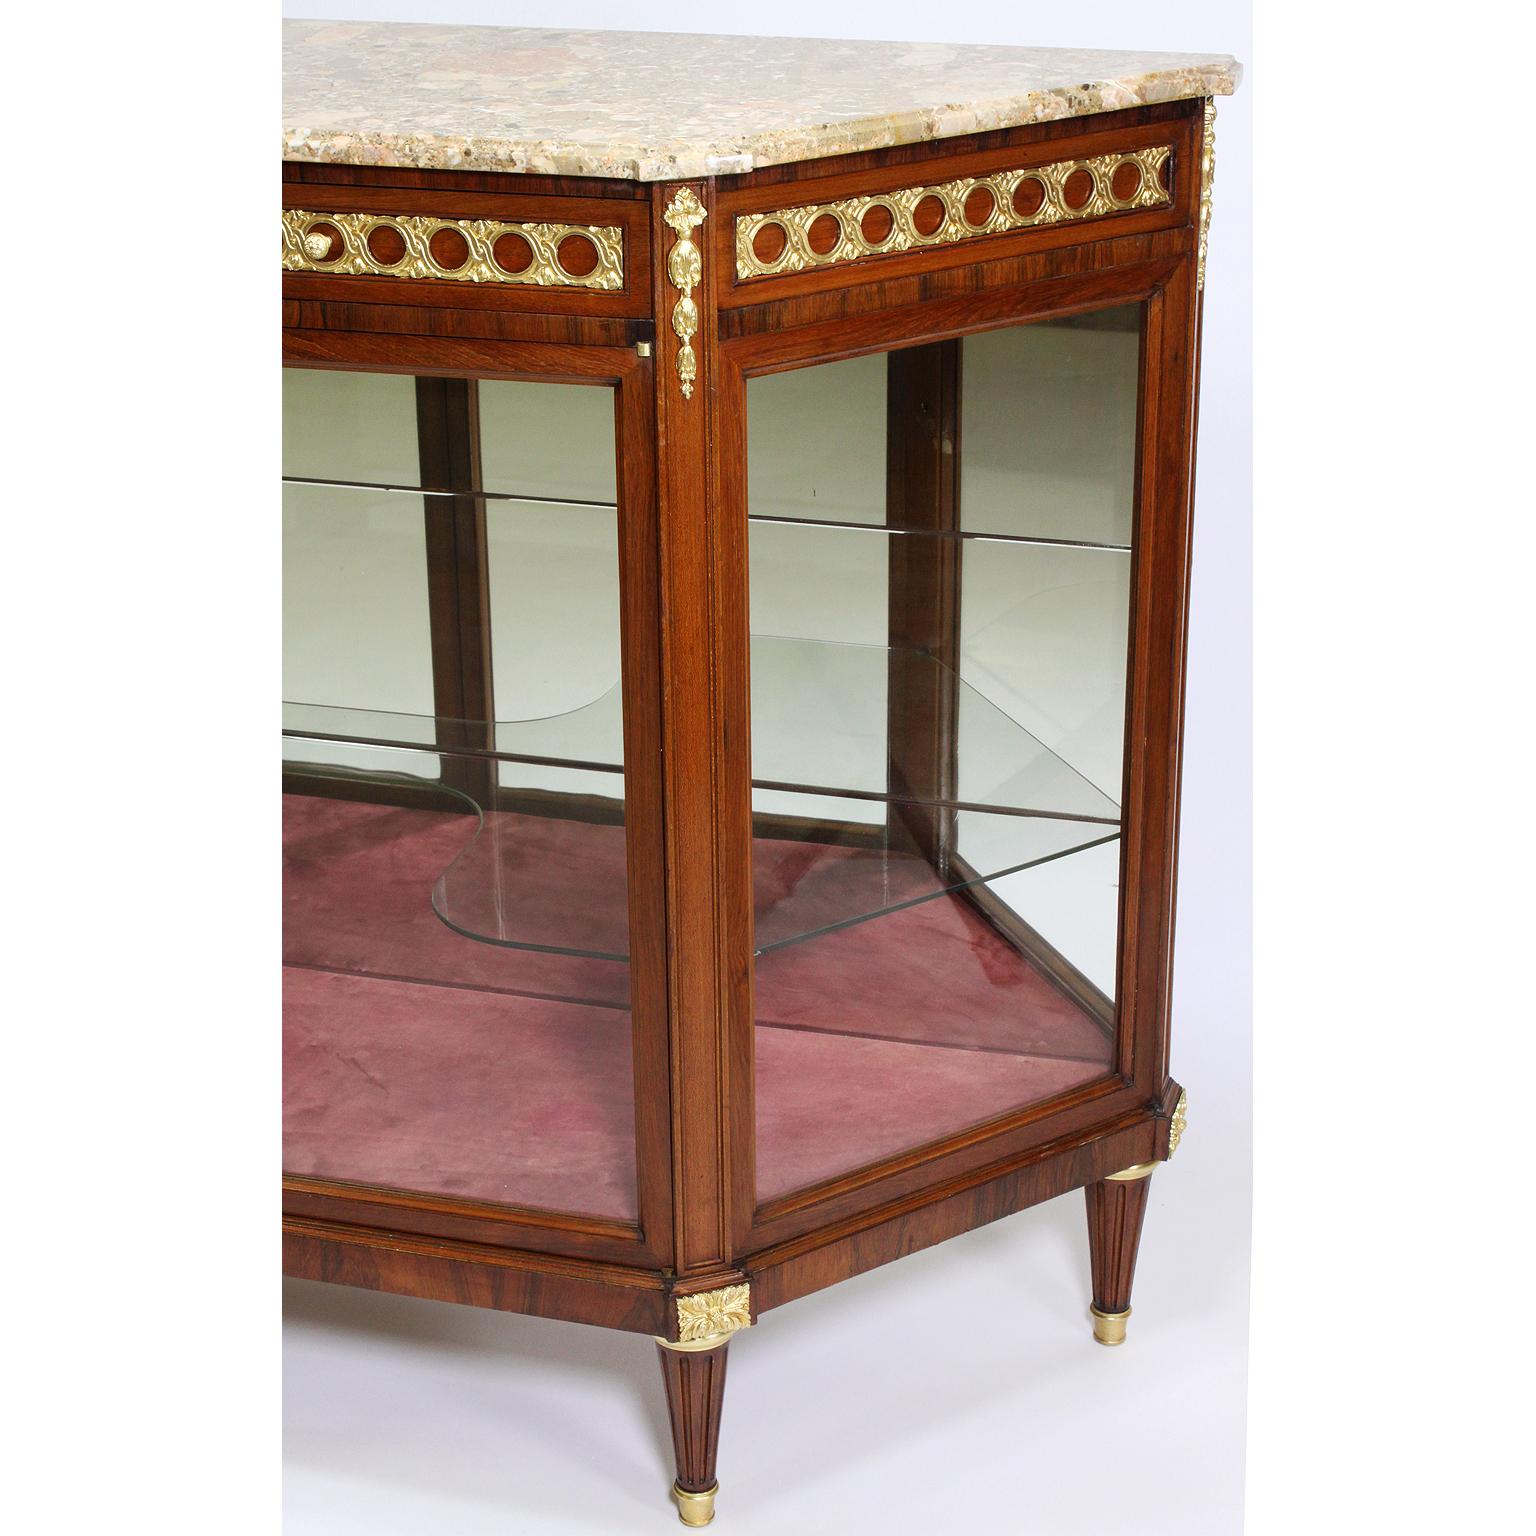 French Louis XVI Style Mahogany and Gilt-Bronze Mounted Sever Exhibition Vitrine For Sale 1